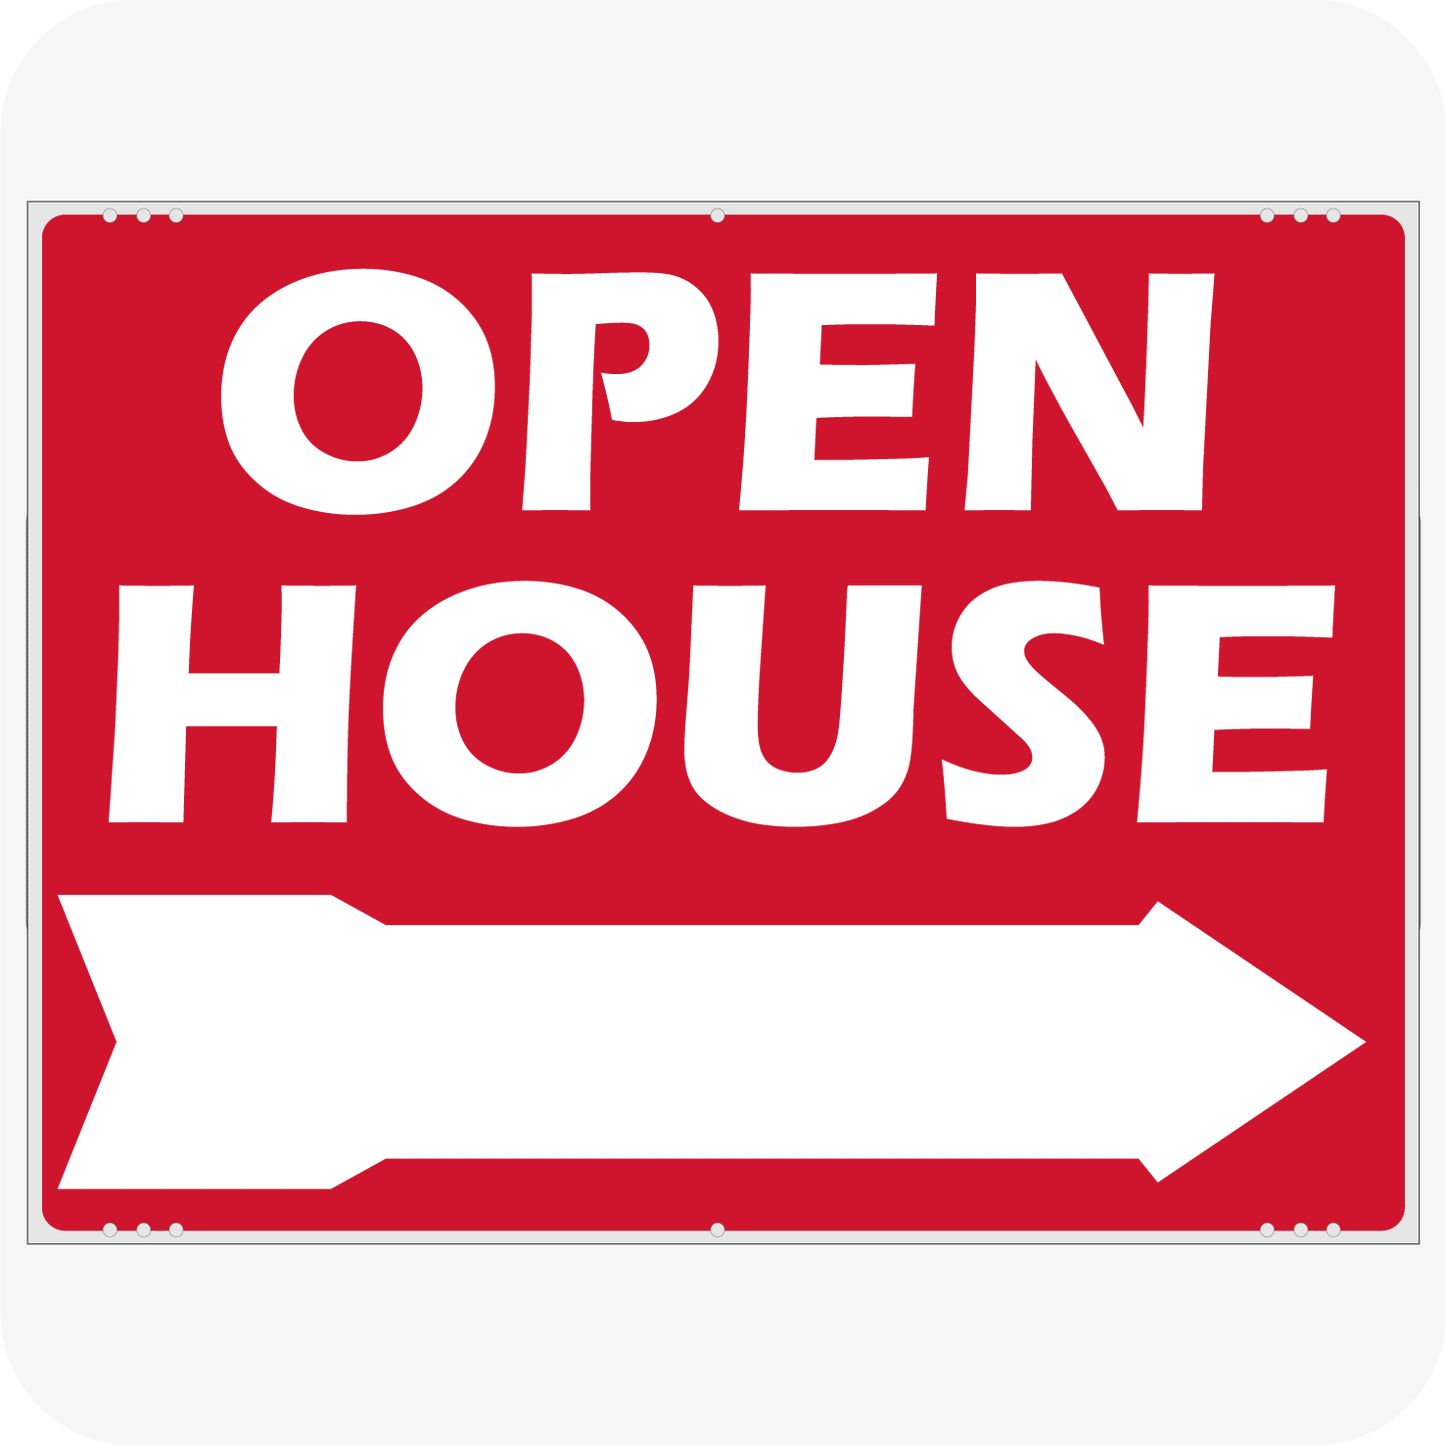 Open House Arrow 18 x 24 Corrugated Panel - Red